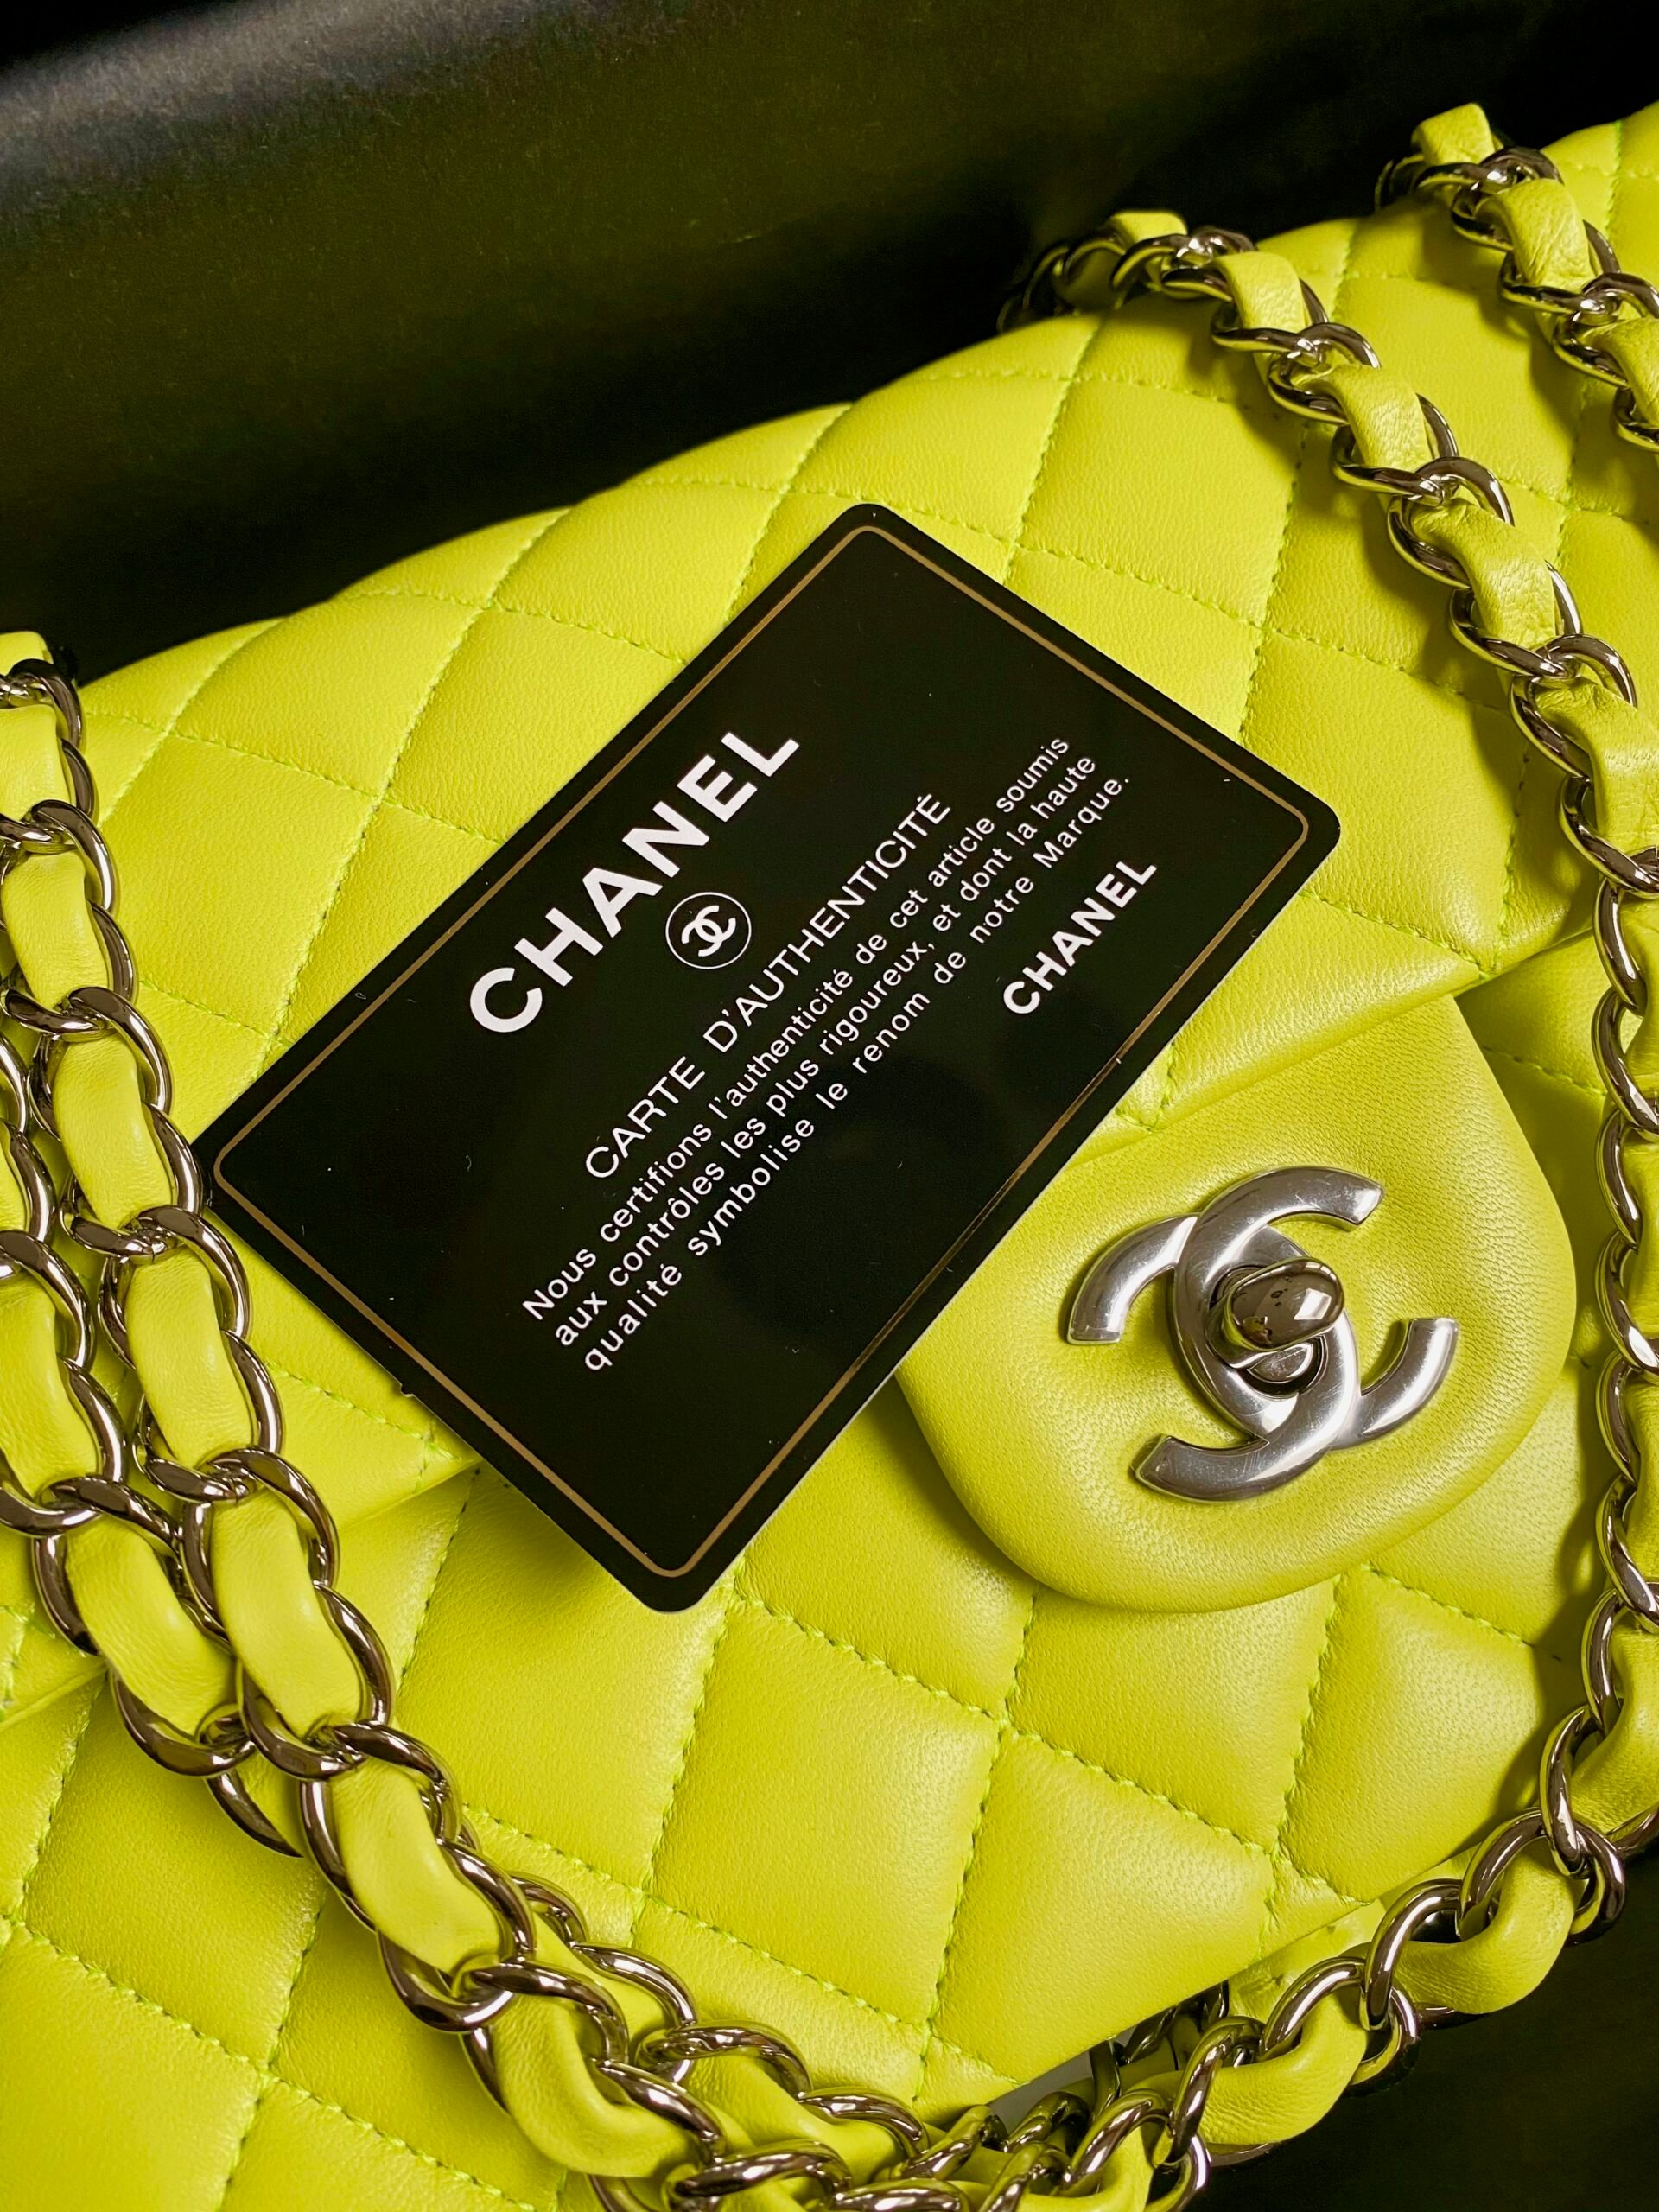 HOW TO SPOT A FAKE CHANEL BAG